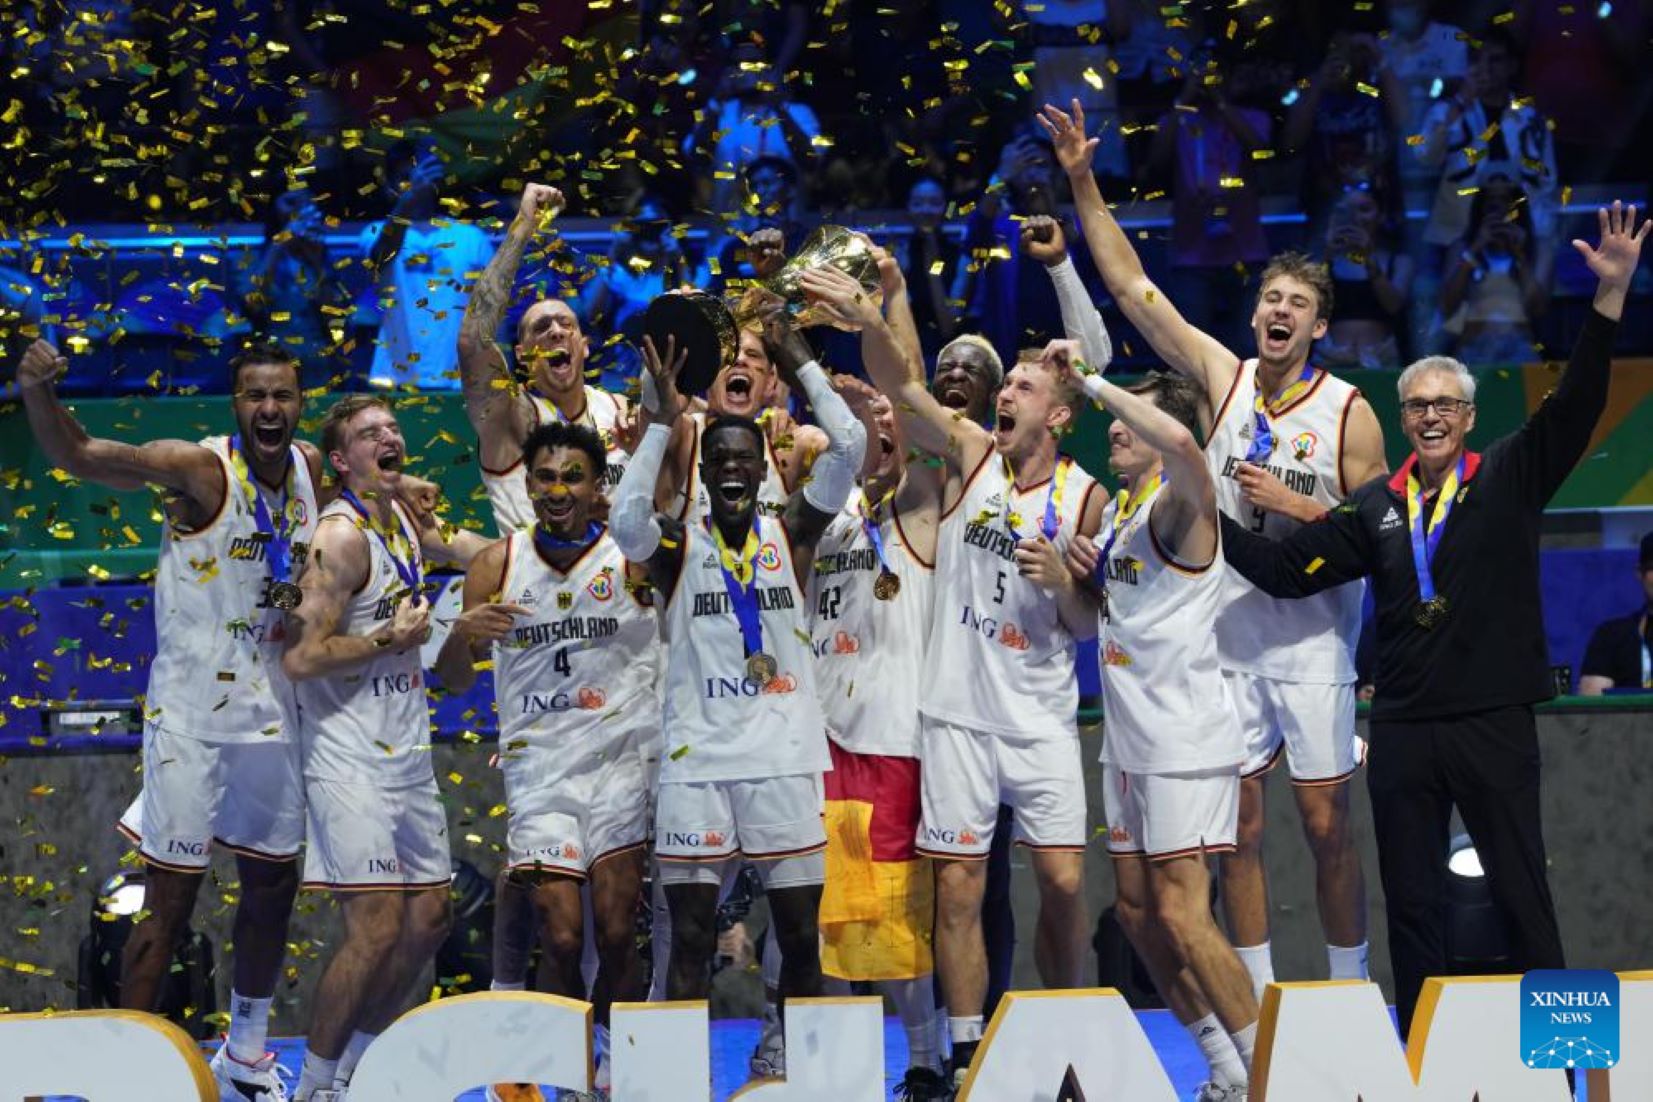 Germany Wins FIBA World Cup For First Time, Schroder Awarded MVP